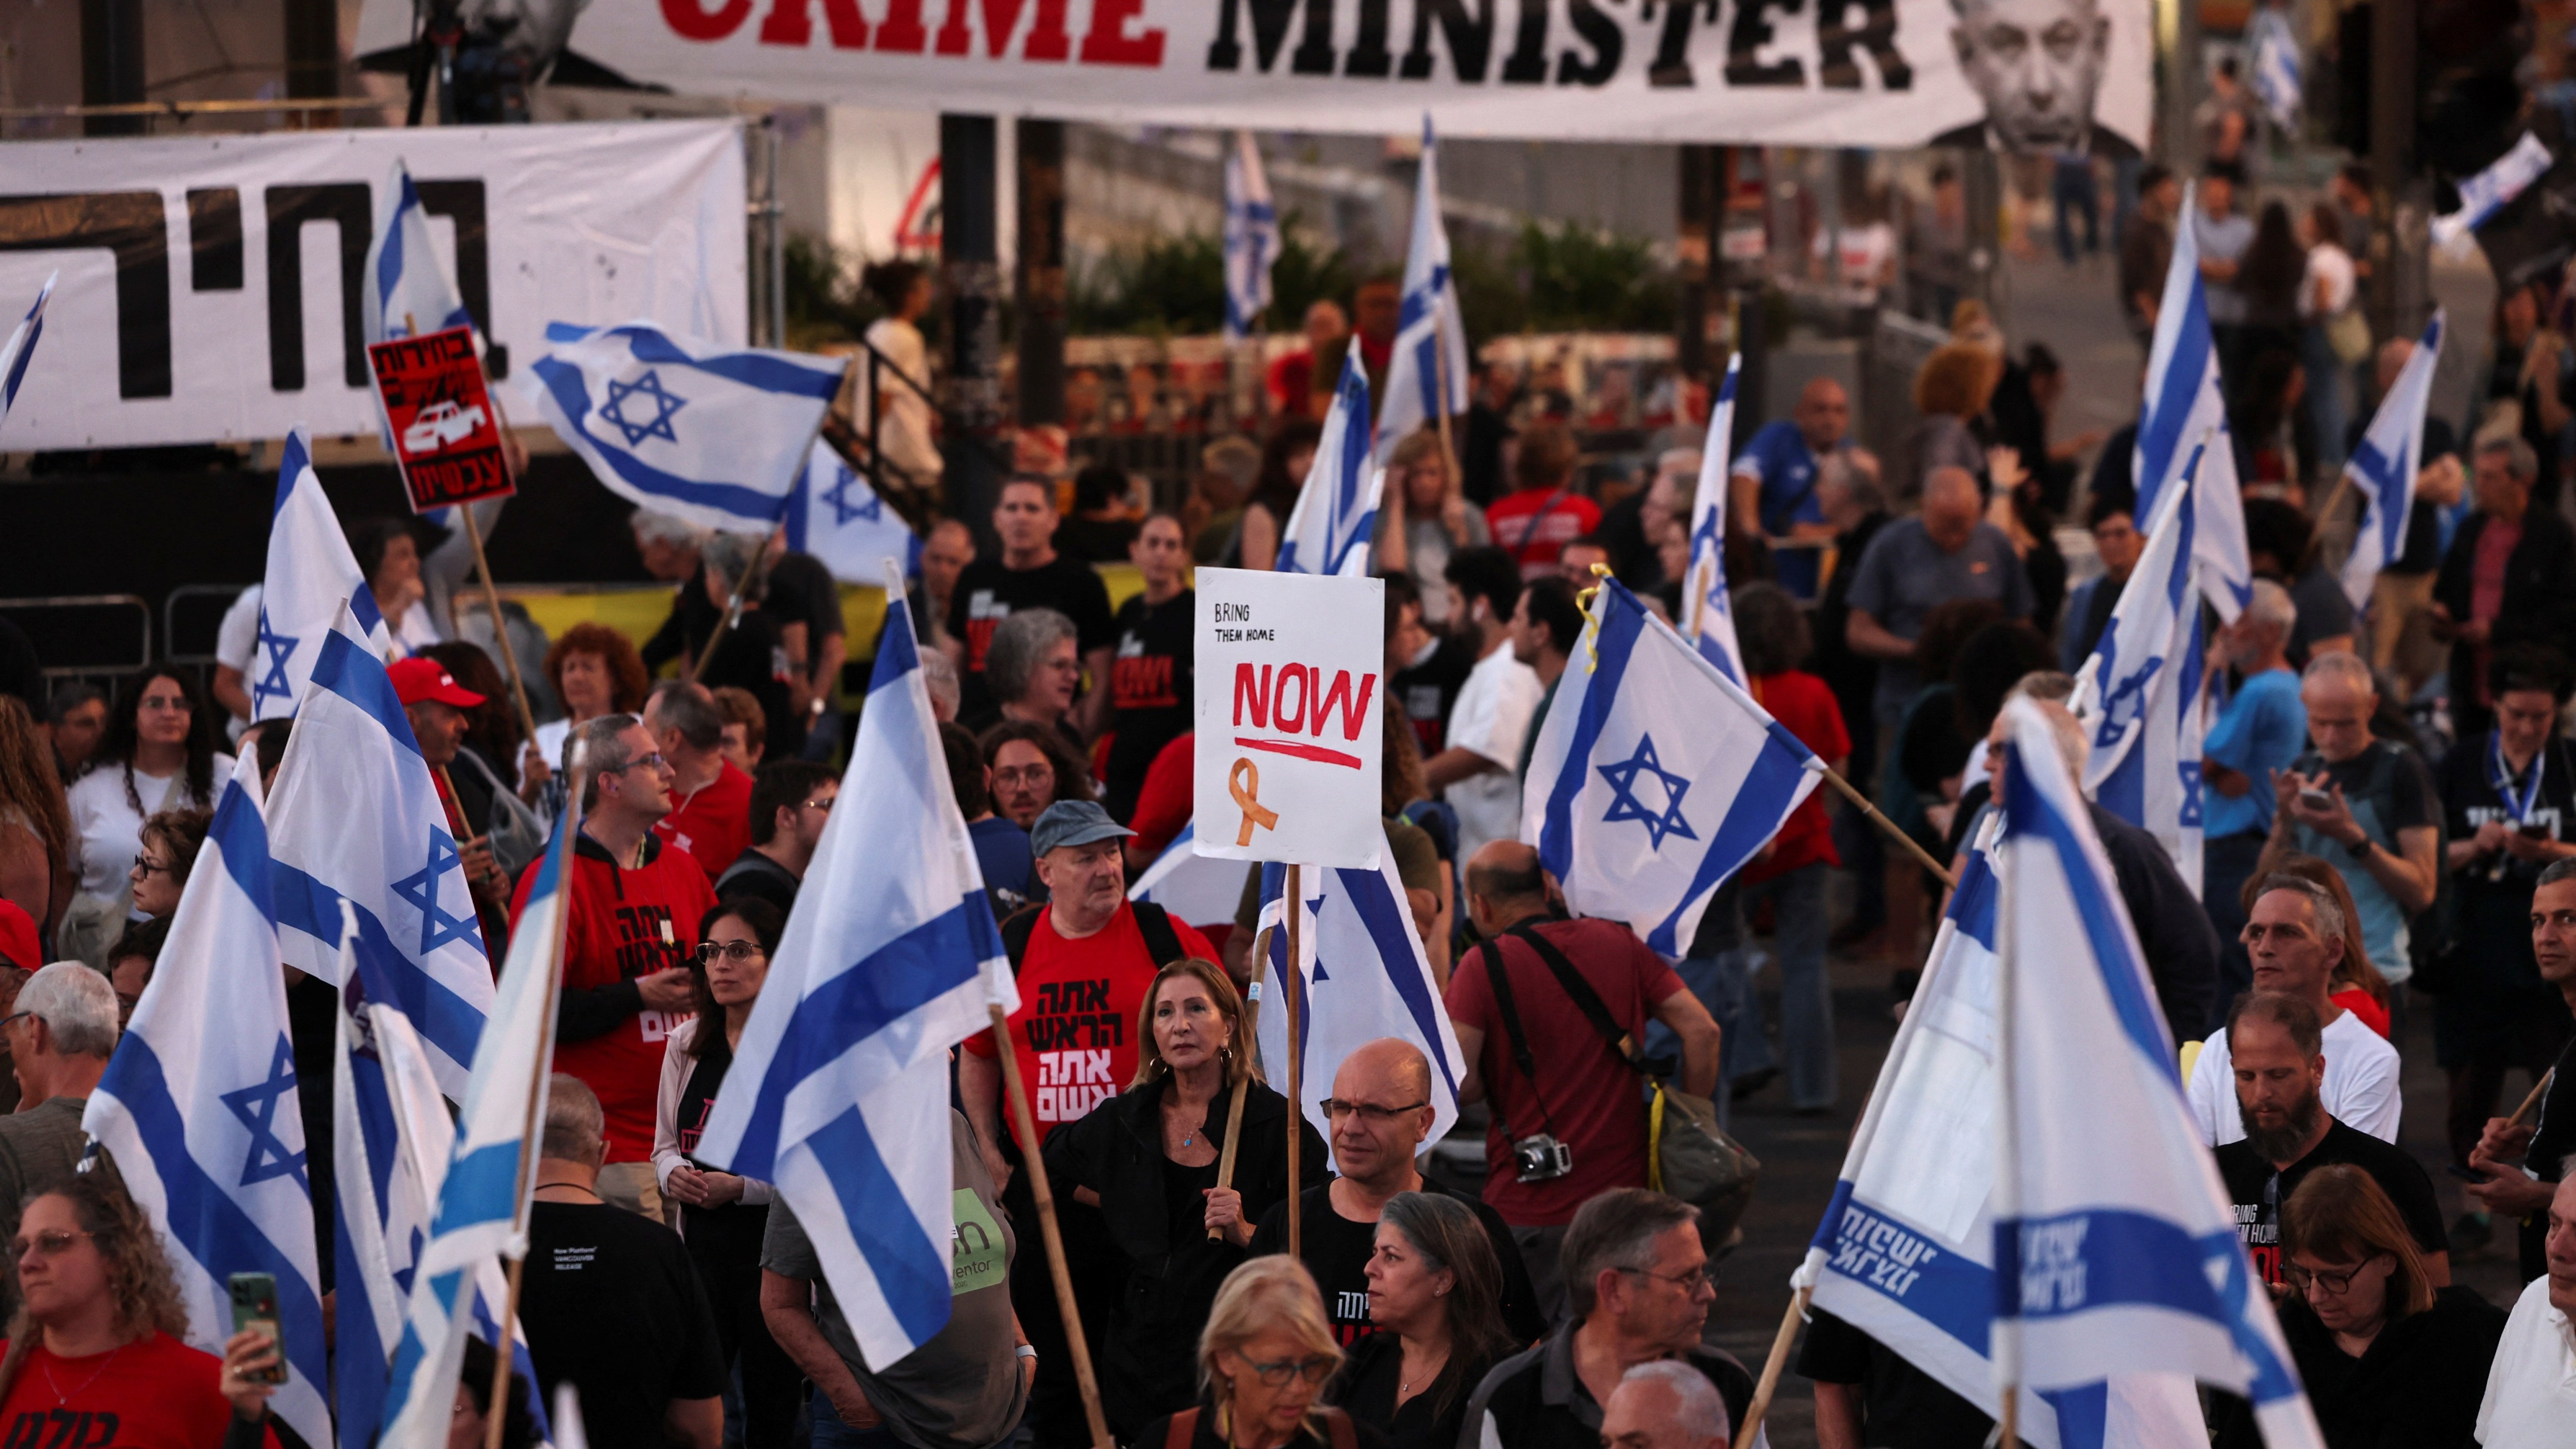 Anti-Netanyahu protesters demand the release of Israeli hostages held in Gaza at a march in Tel Aviv on Saturday